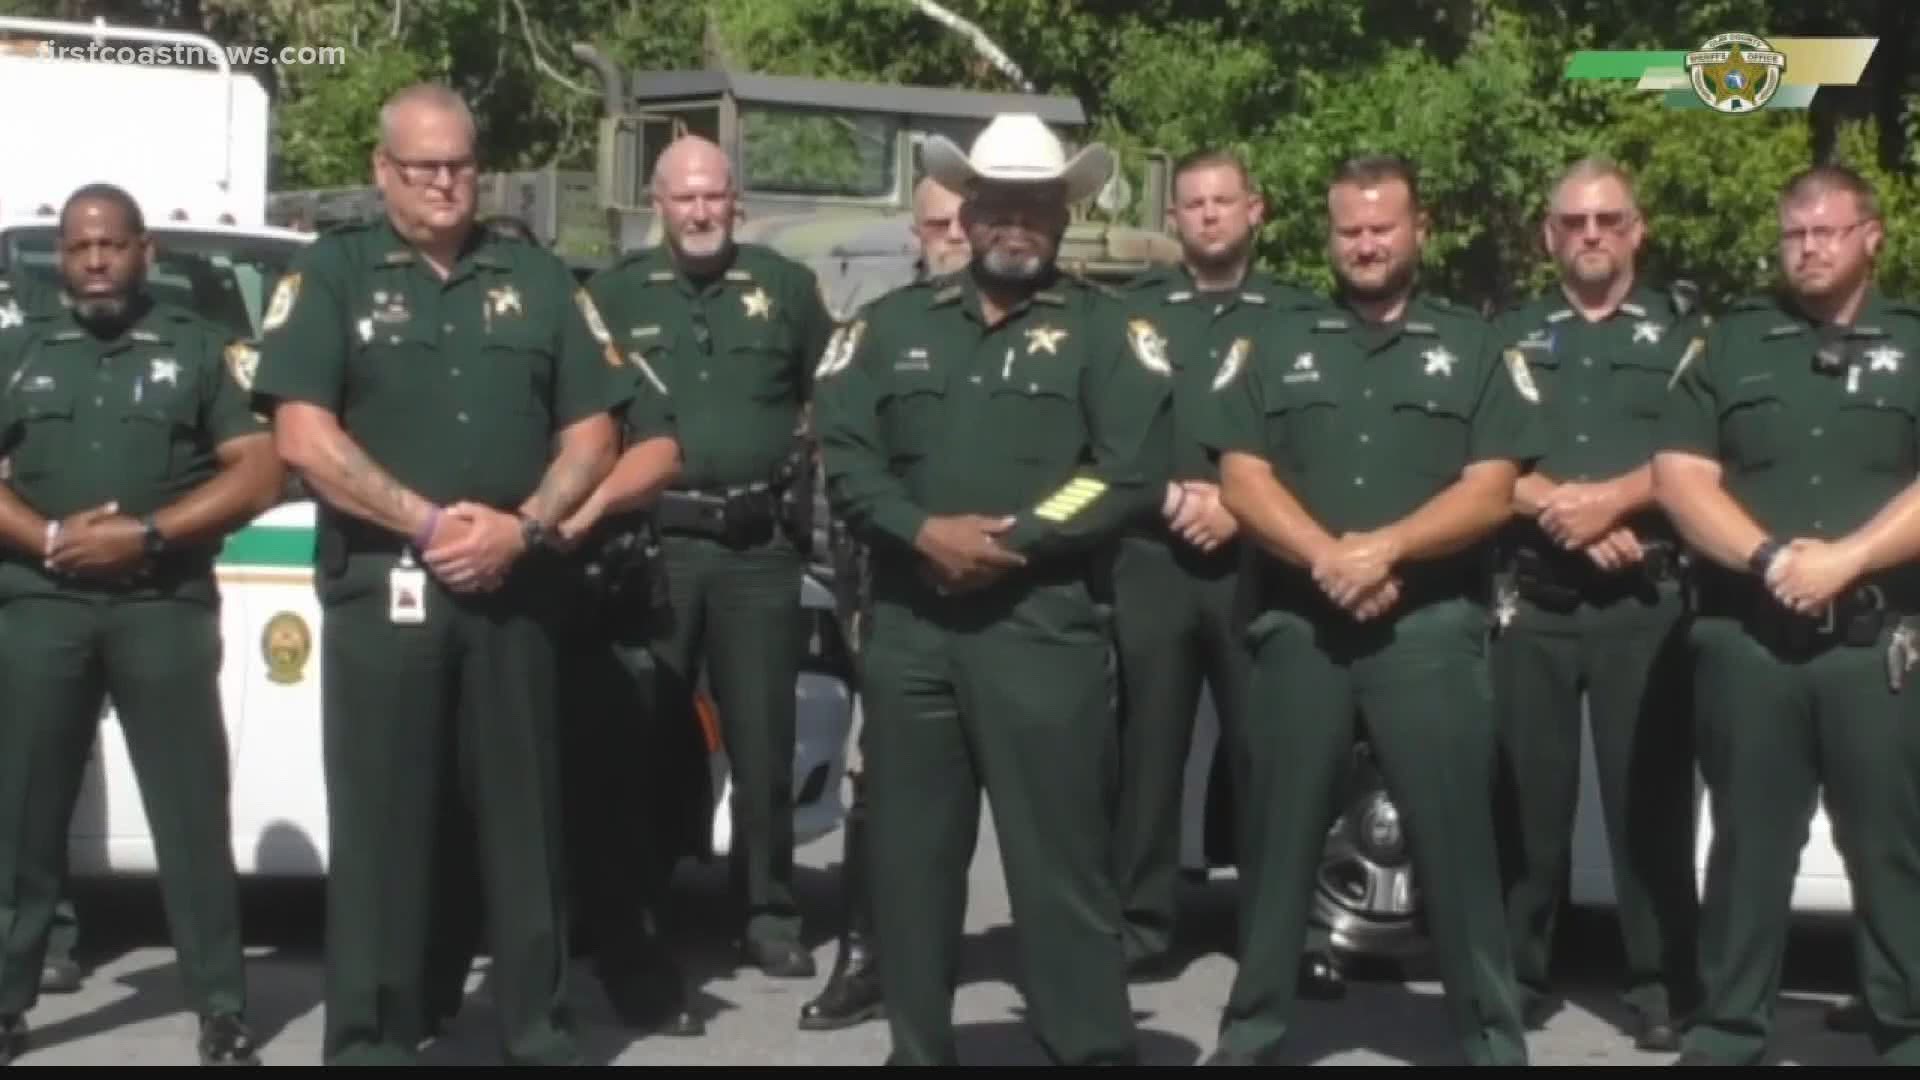 Clay County Sheriff Darryl Daniels vowed to put down any protests that aren’t peaceful with the full force of his office and with the help of gun-owning residents.